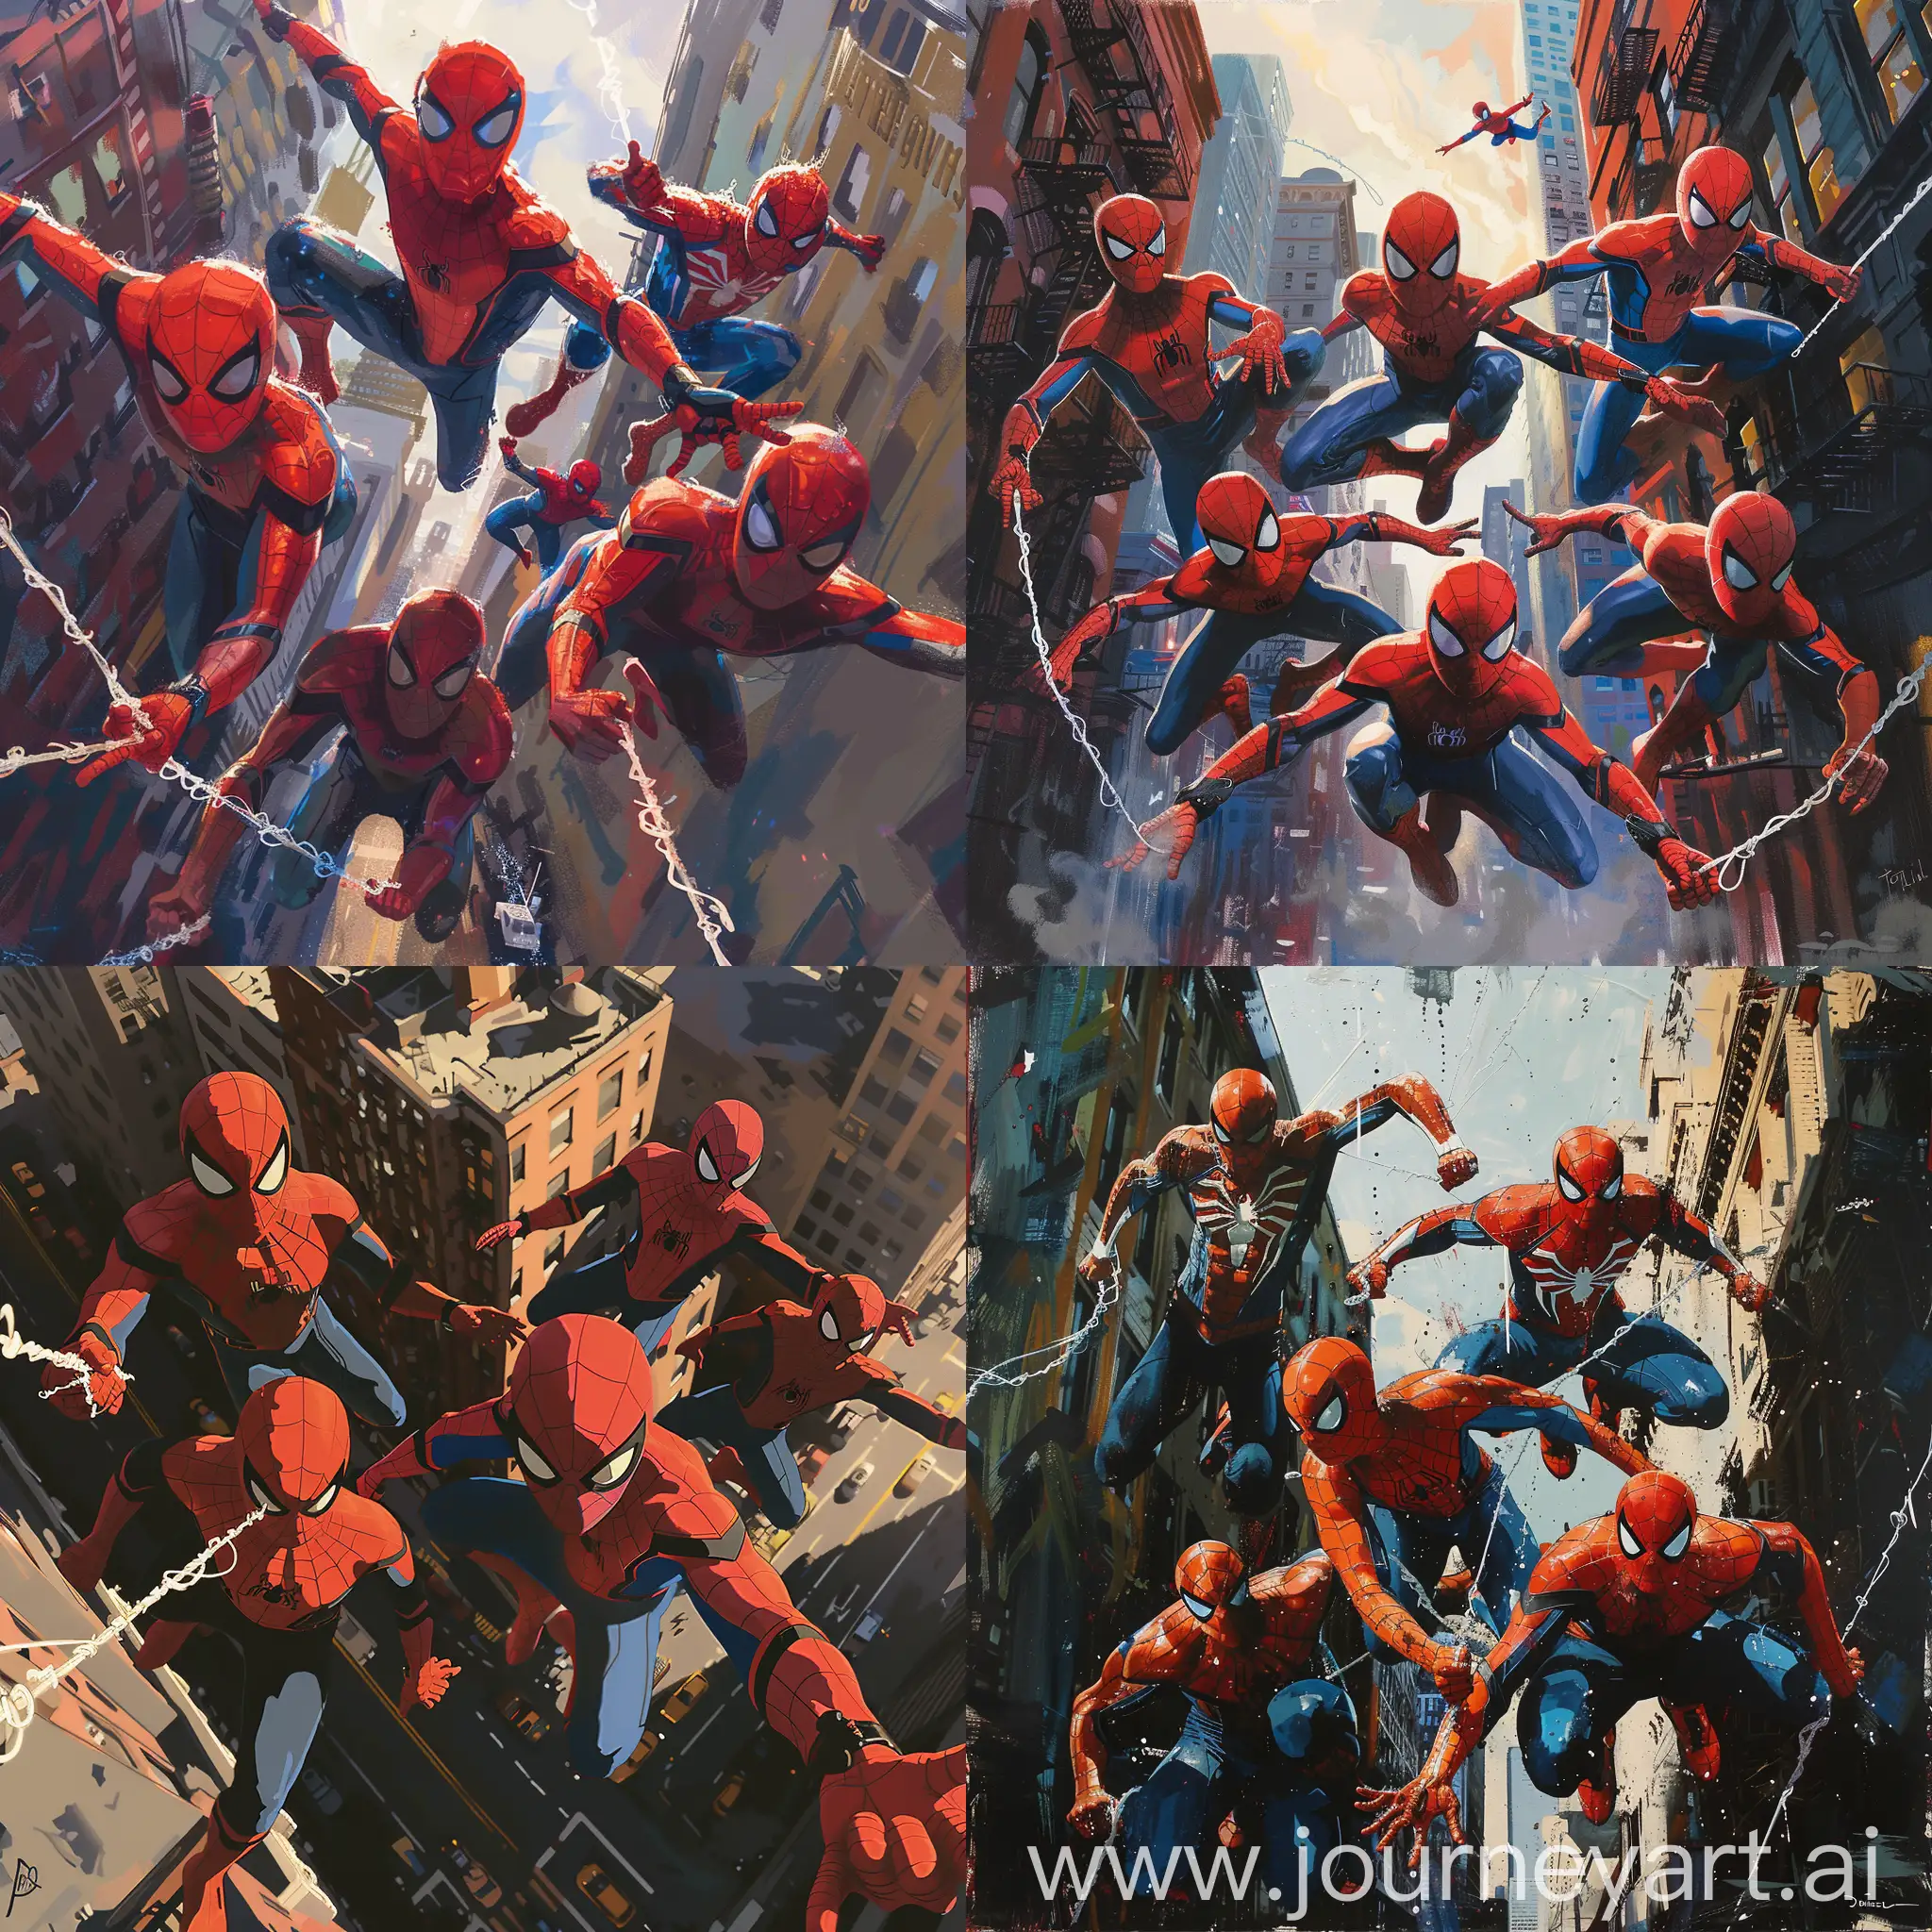 6 adolescent Spidermans swinging through the city looking at the viewer, 3 red, 2 blue, and 1 orange